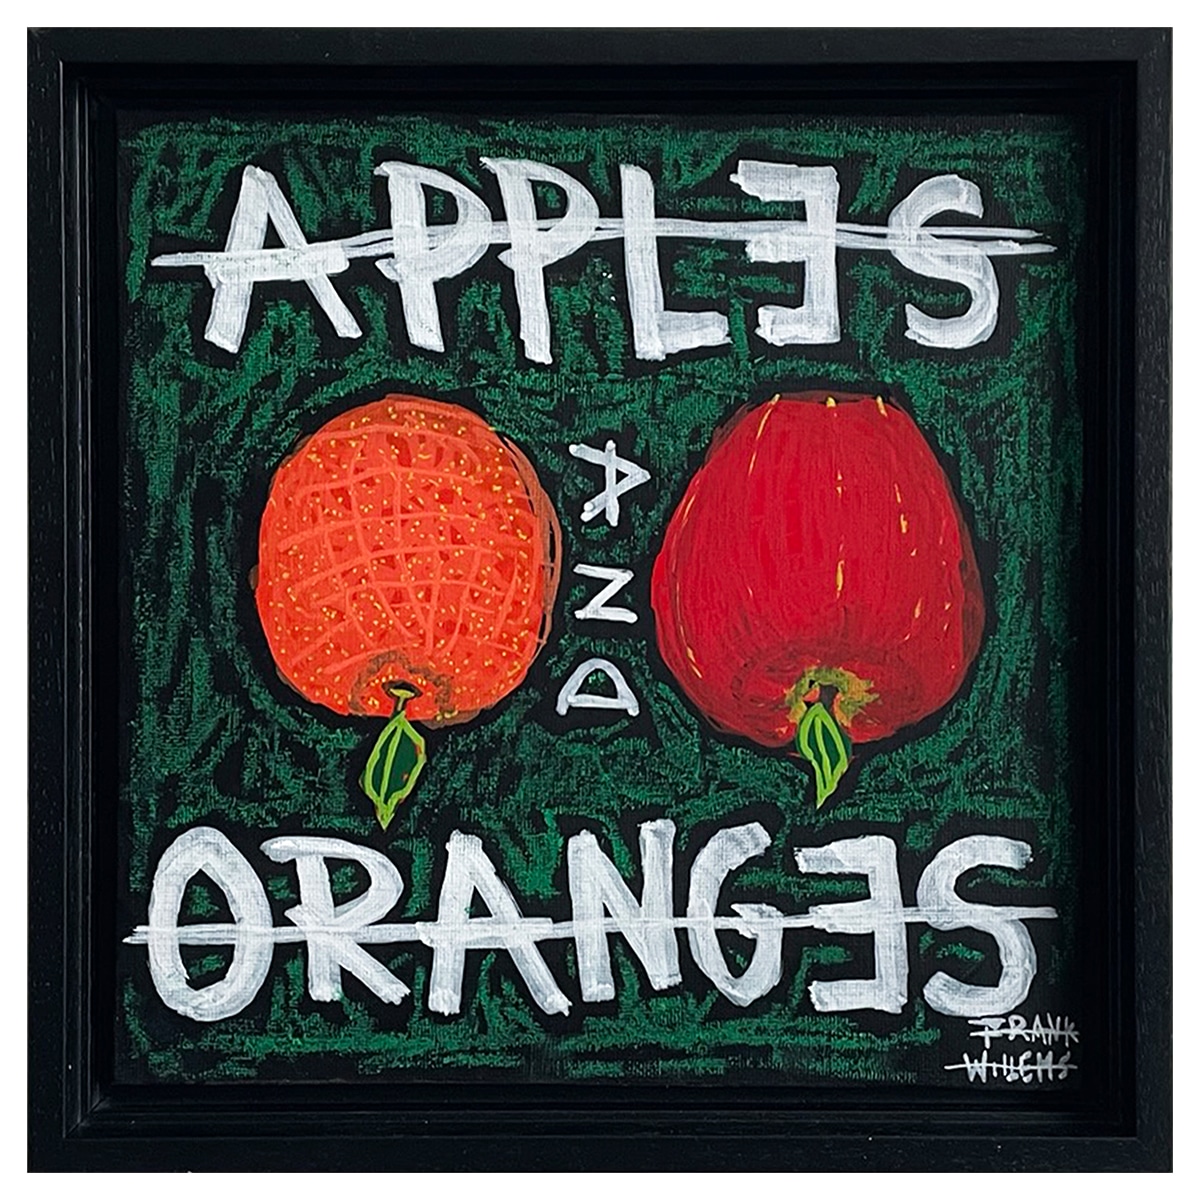 !APPLES AND ORANGES - Frank Willems